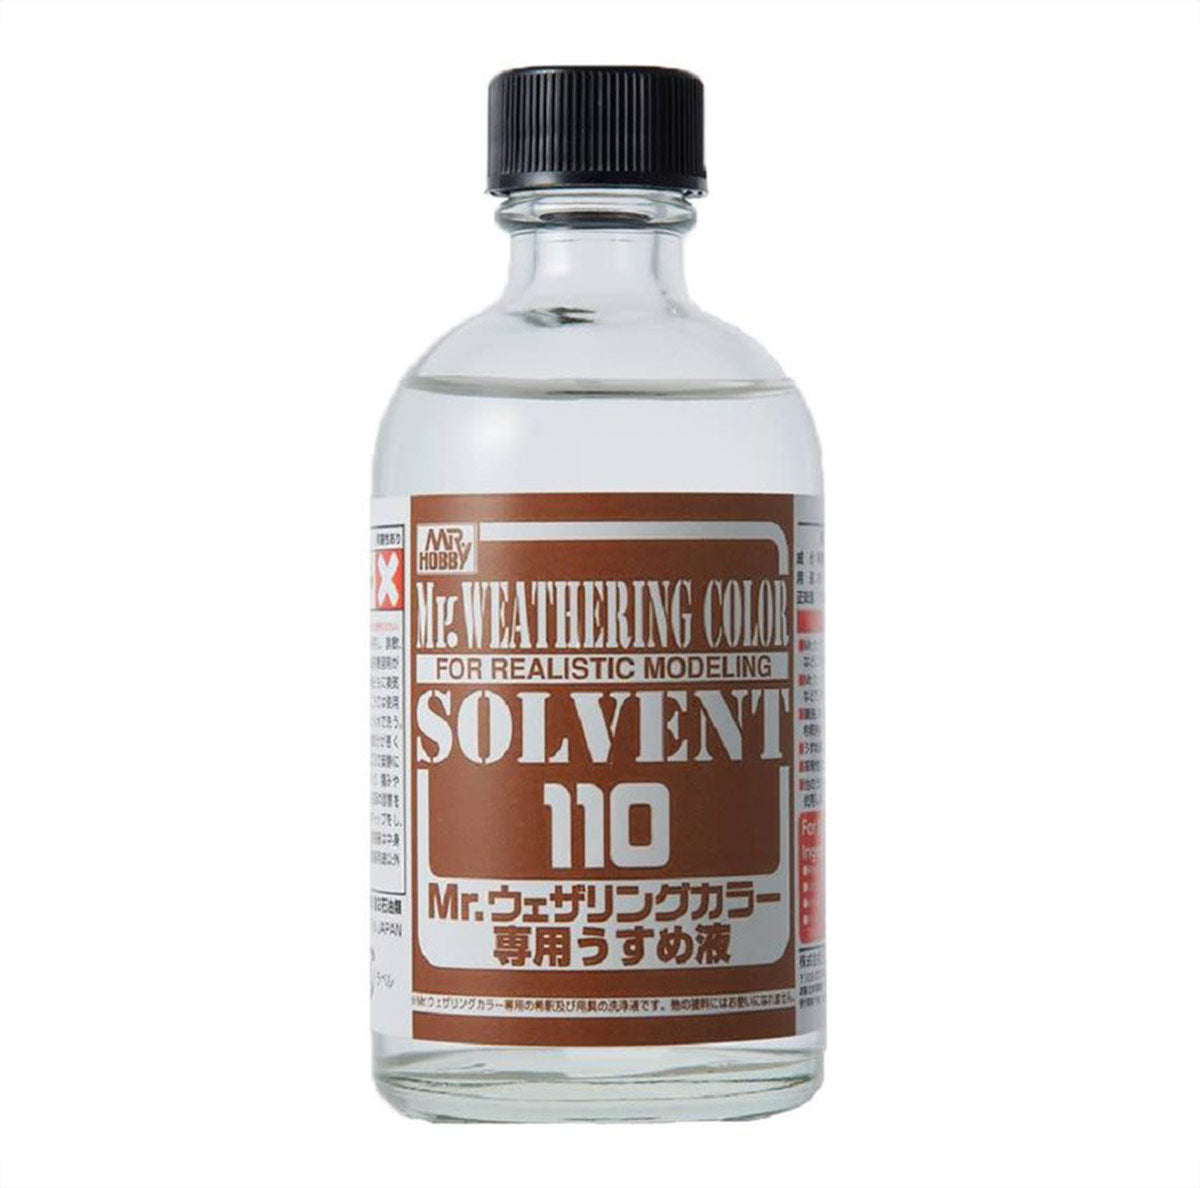 Mr. Color Leveling Thinner - The Only Thinner You Need For Solvent